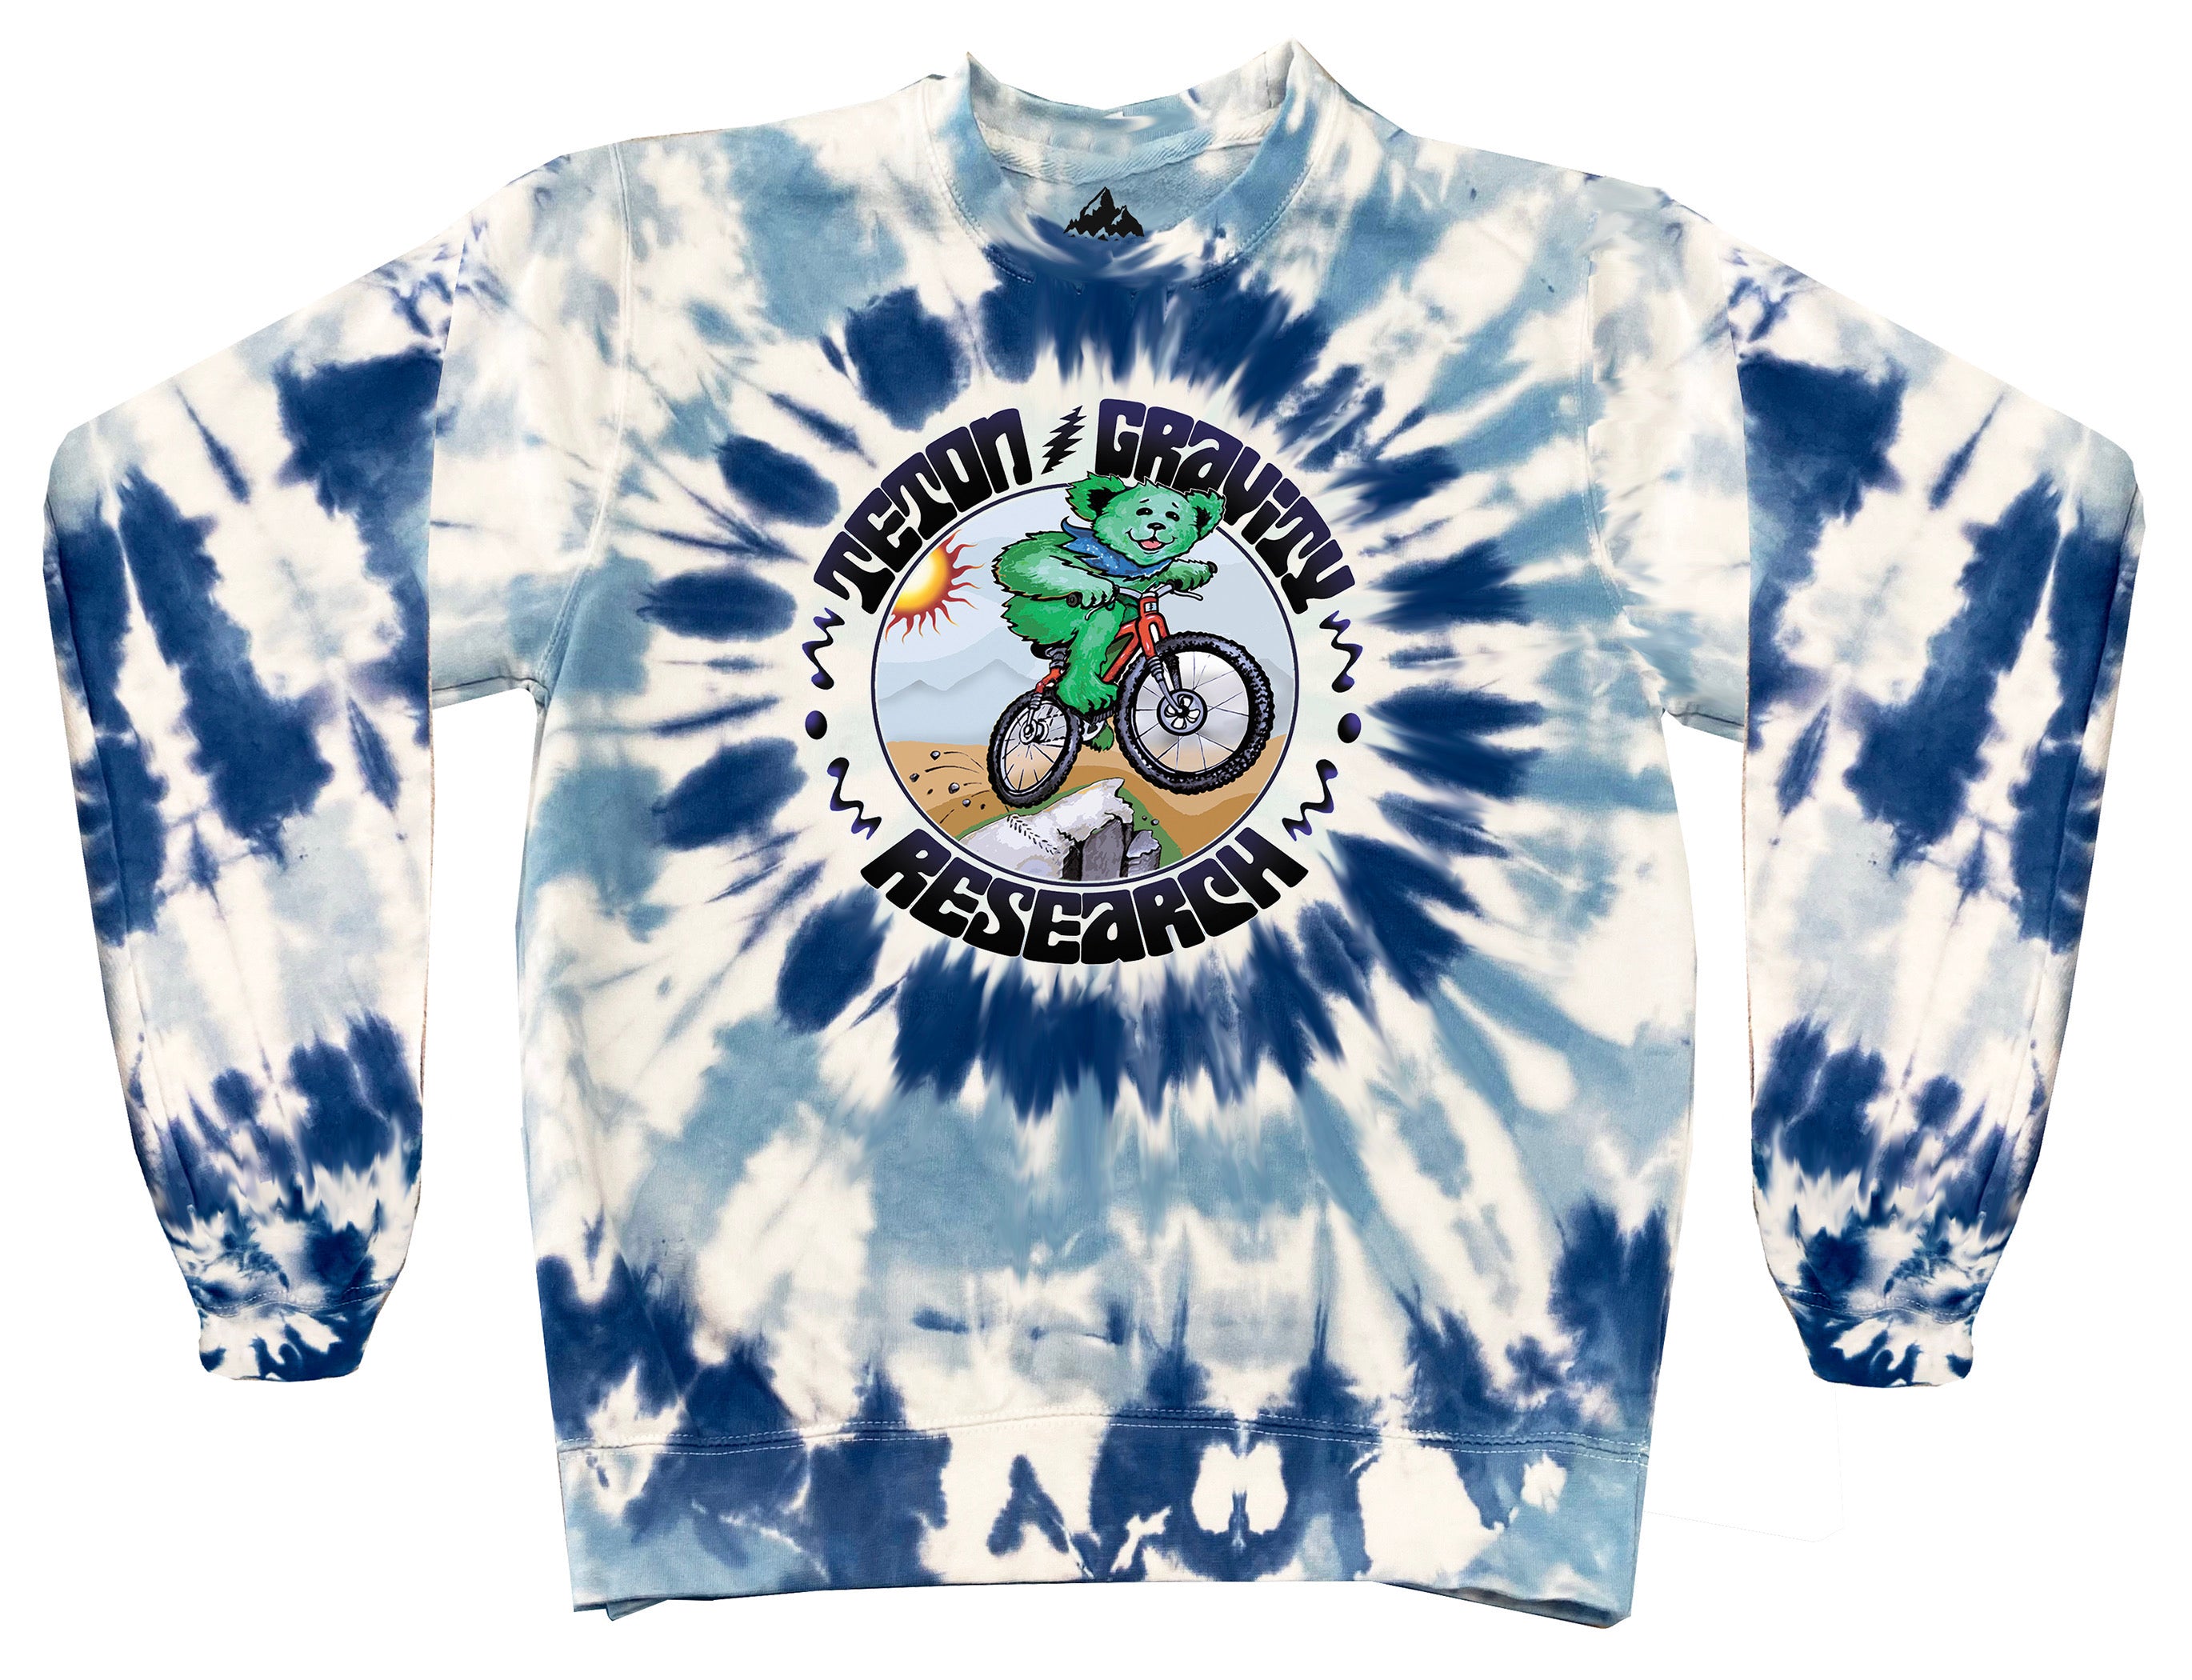 Grateful Dead x TGR “Spent A Little Time on the Mountain” Crewneck by Peter Forsythe